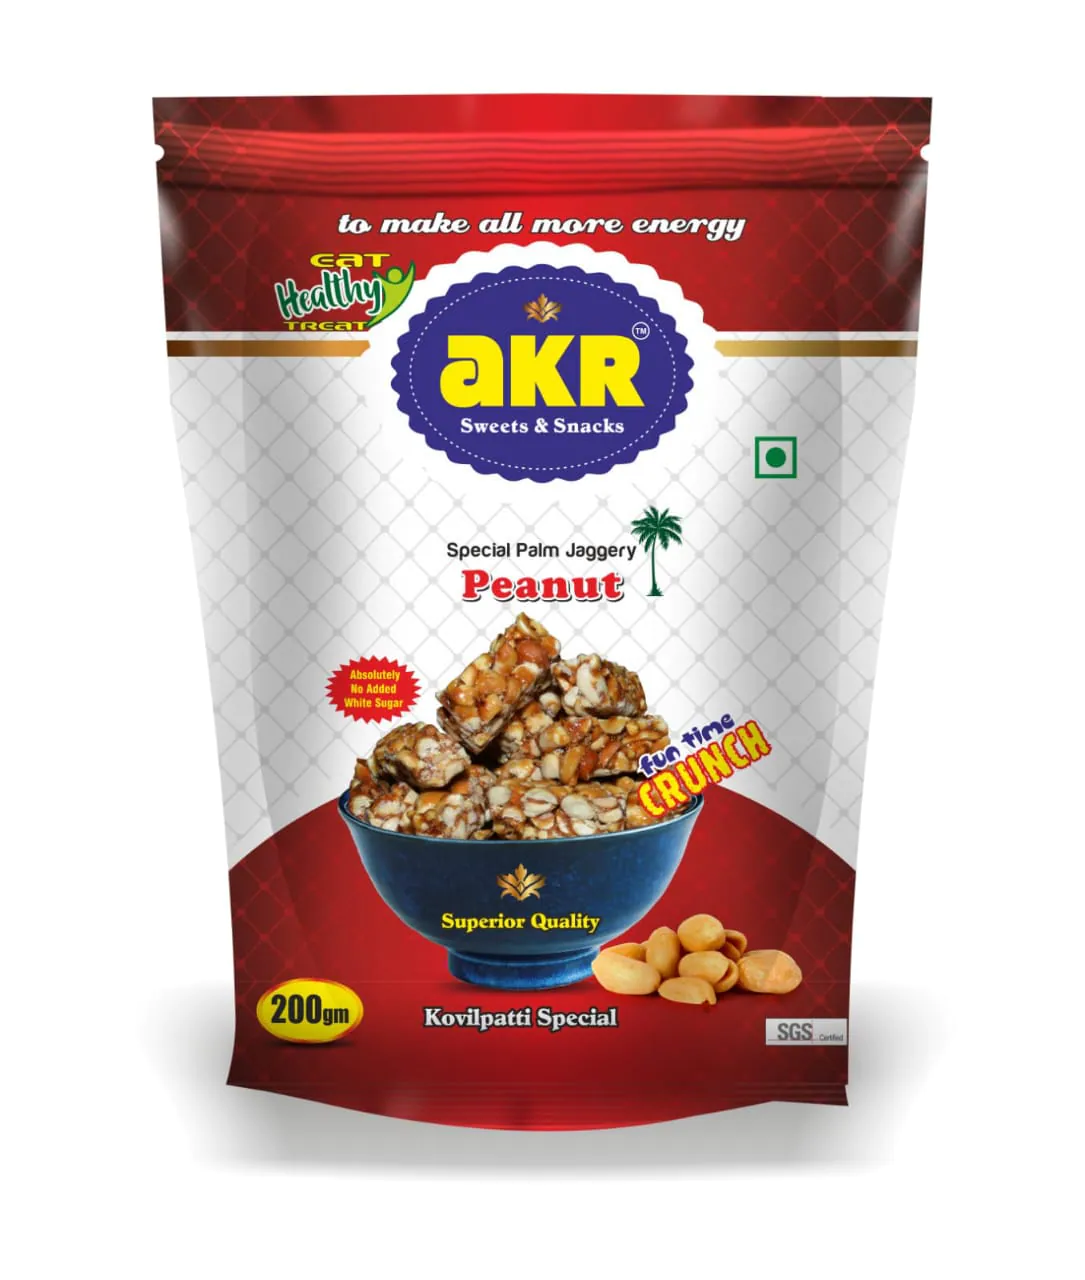 AKR - Special Palm Jaggery Peanut Candy | Kovilapatti Special | Nutritious Bar, No Added Preservatives and Colours | Pack of 2-Each of 200g